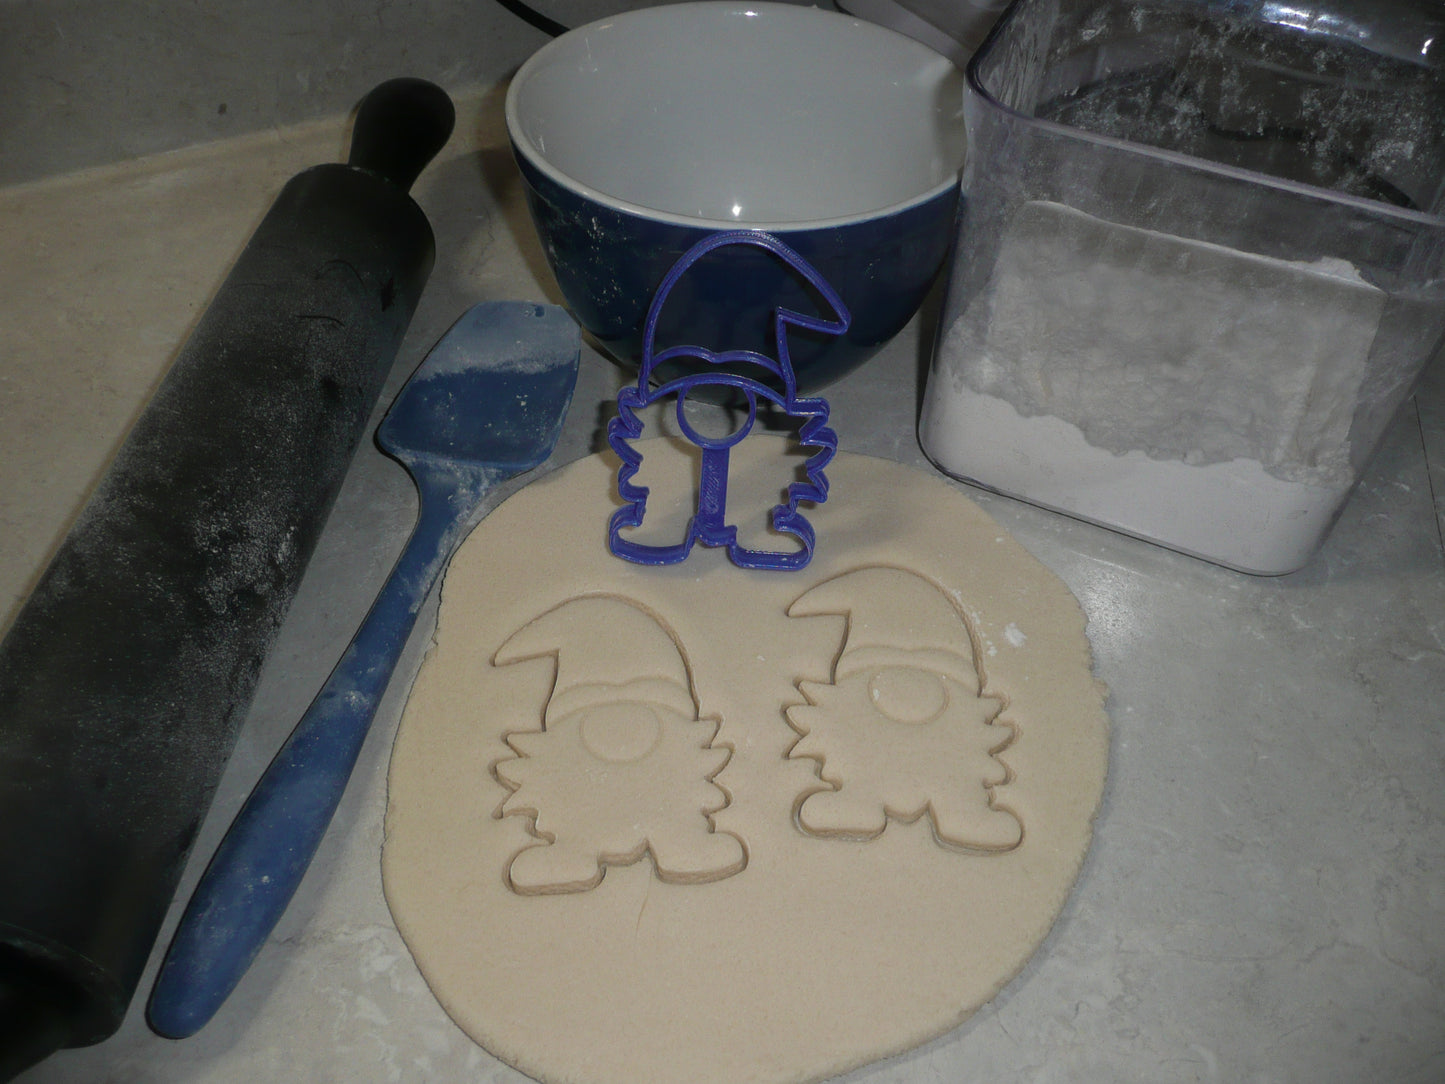 Gnome Garden Ornament Good Luck Charm Cookie Cutter Made in USA PR3359